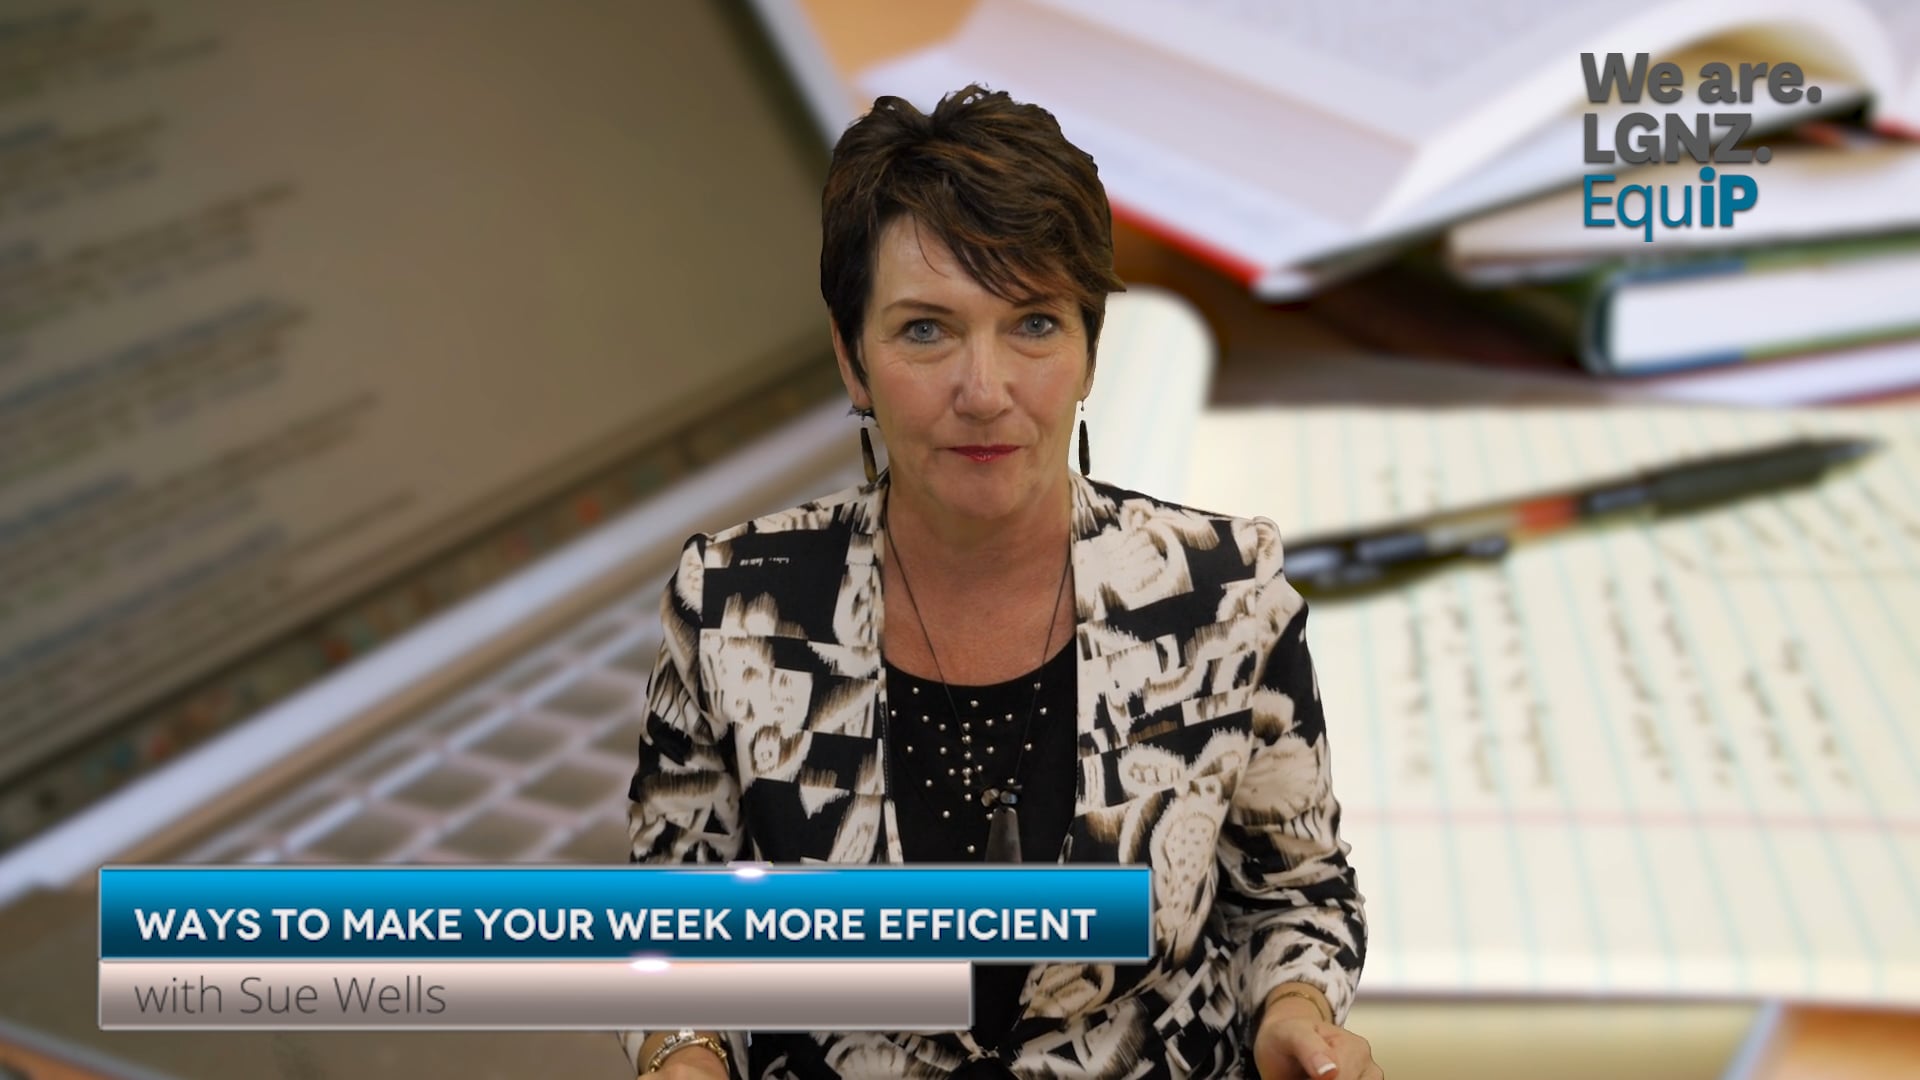 Way to make your week more efficient - with Sue Wells